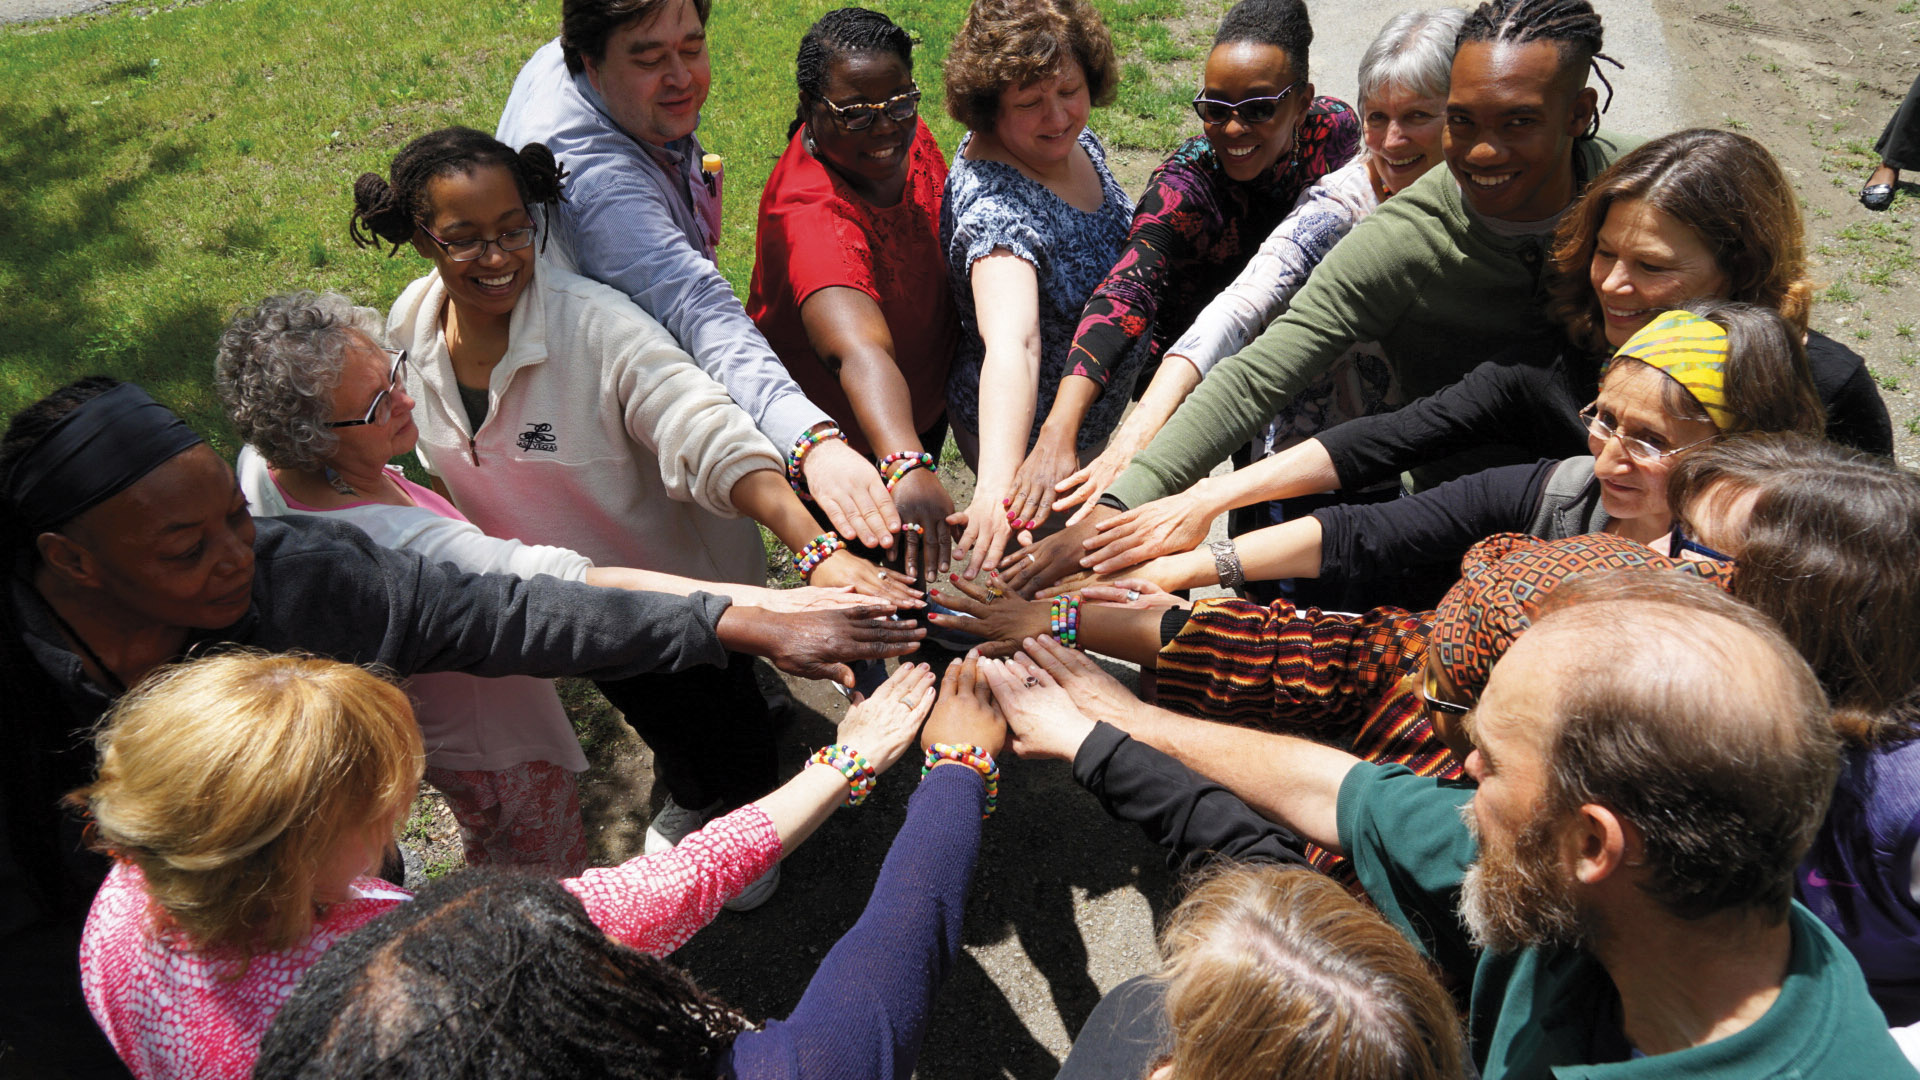 A group of diverse individuals standing in a circle putting their hands together in community.